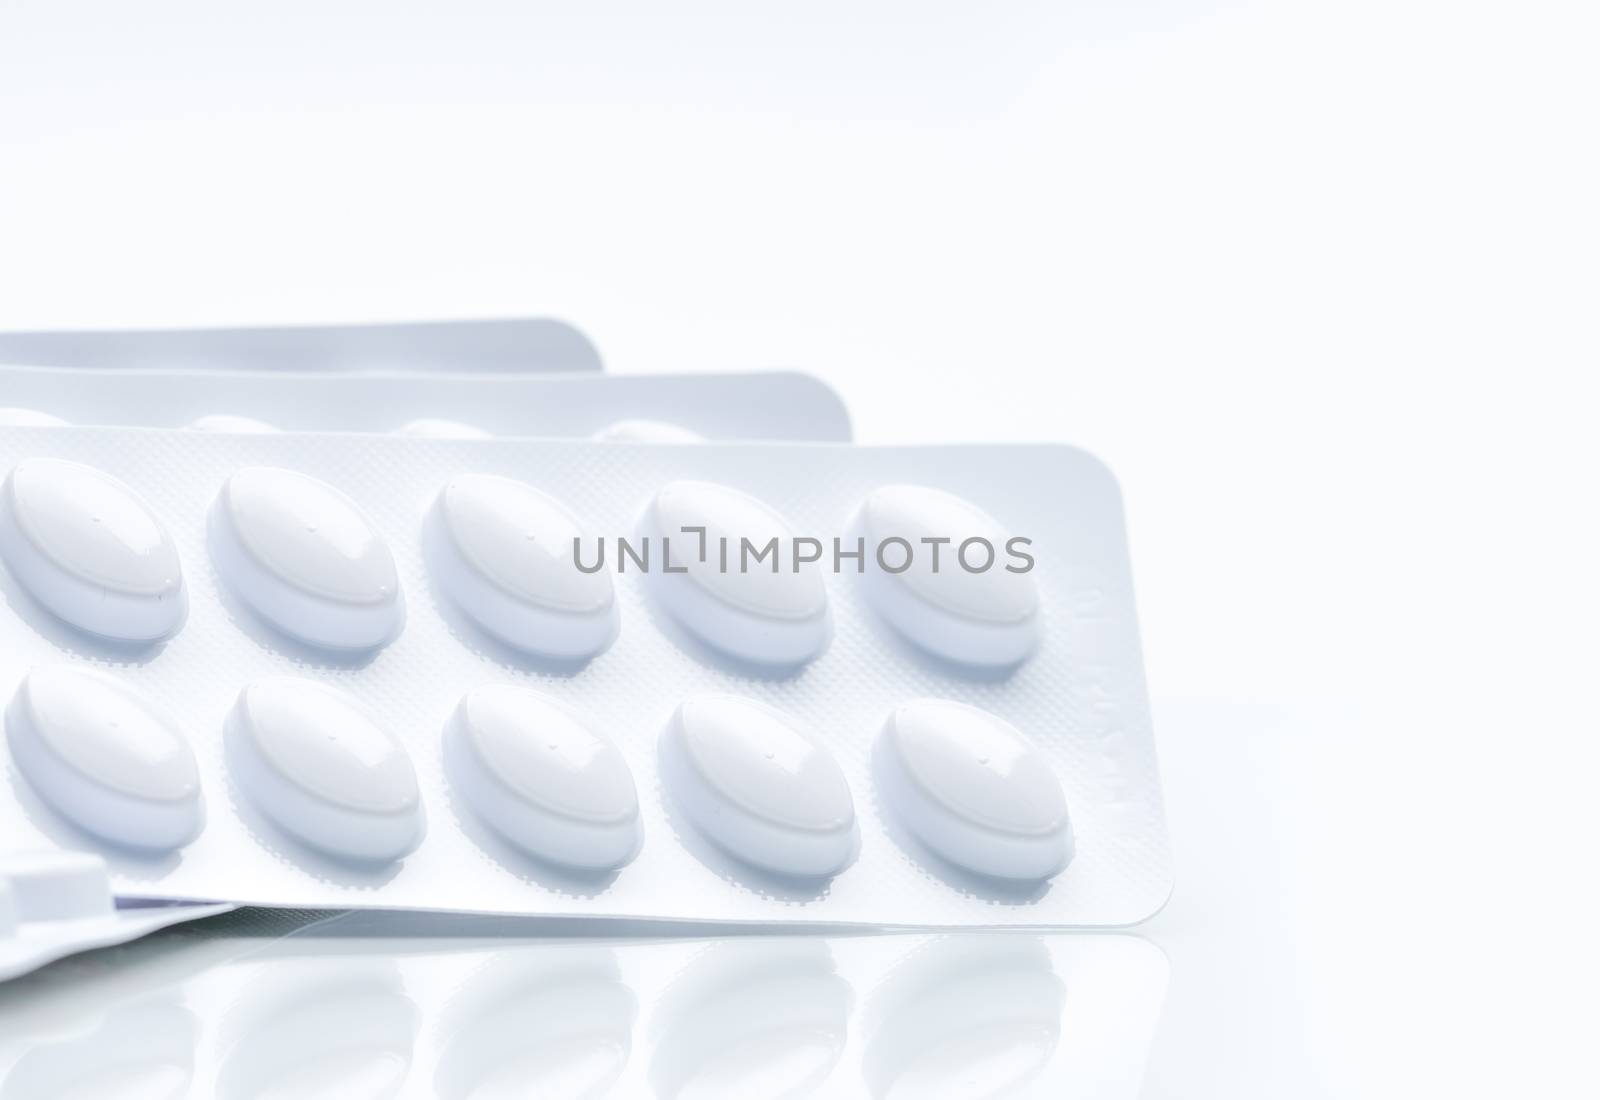 Statins tablets pill in white blister pack for light resistance packaging isolated on white background. Medicine for treatment dyslipidemia. Lipid lowering tablets pills. Statins : Hyperlipidemia. Pharmaceutical industry. Pharmacy background. Global healthcare concept. Health budgets and policy.